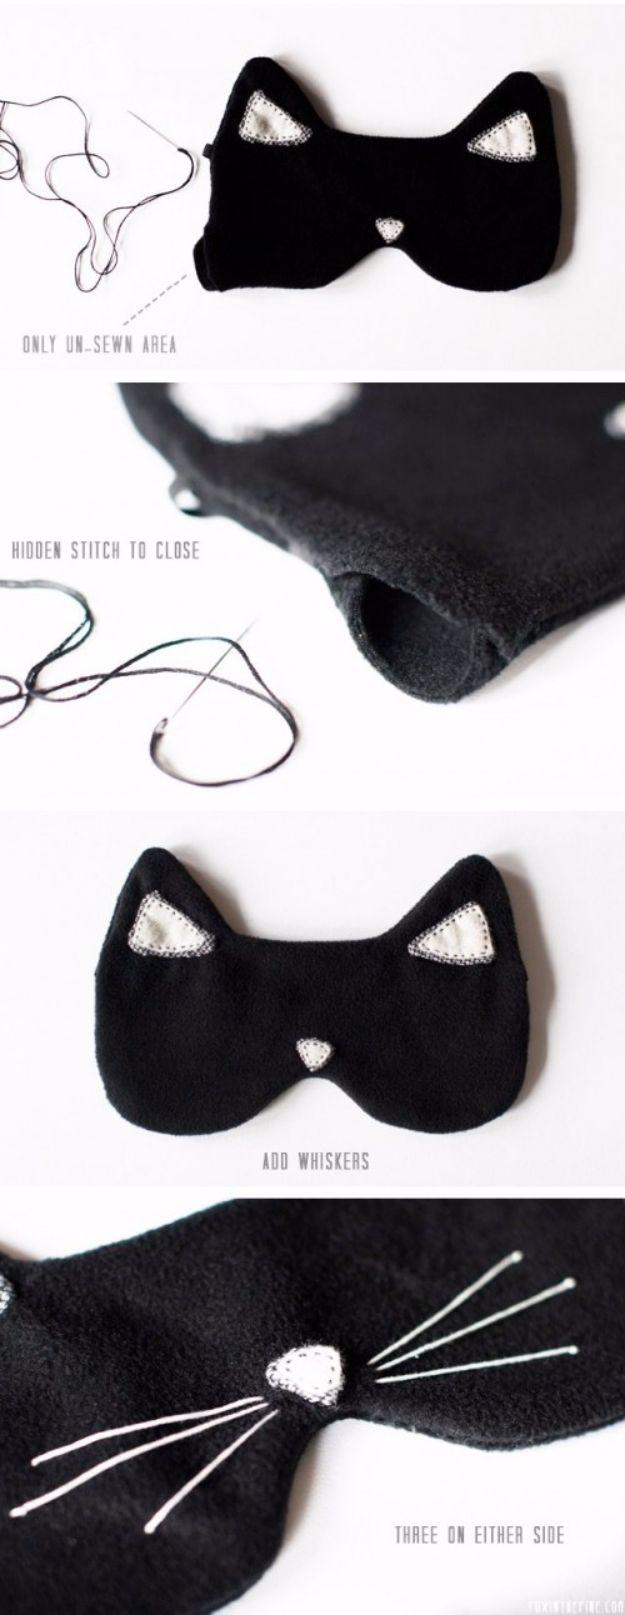 DIY Sleep Masks - DIY Cat Eye Mask For A Comfortable Sleep - Cute and Easy Ideas for Making a Homemade Sleep Mask - Best DIY Gift Ideas for Her - Cool Crafts To Make and Sell On Etsy - Creative Presents for Girls, Women and Teens - Do It Yourself Sleeping With Words, Accents and Fun Accessories for Relaxing   #diy #diygifts